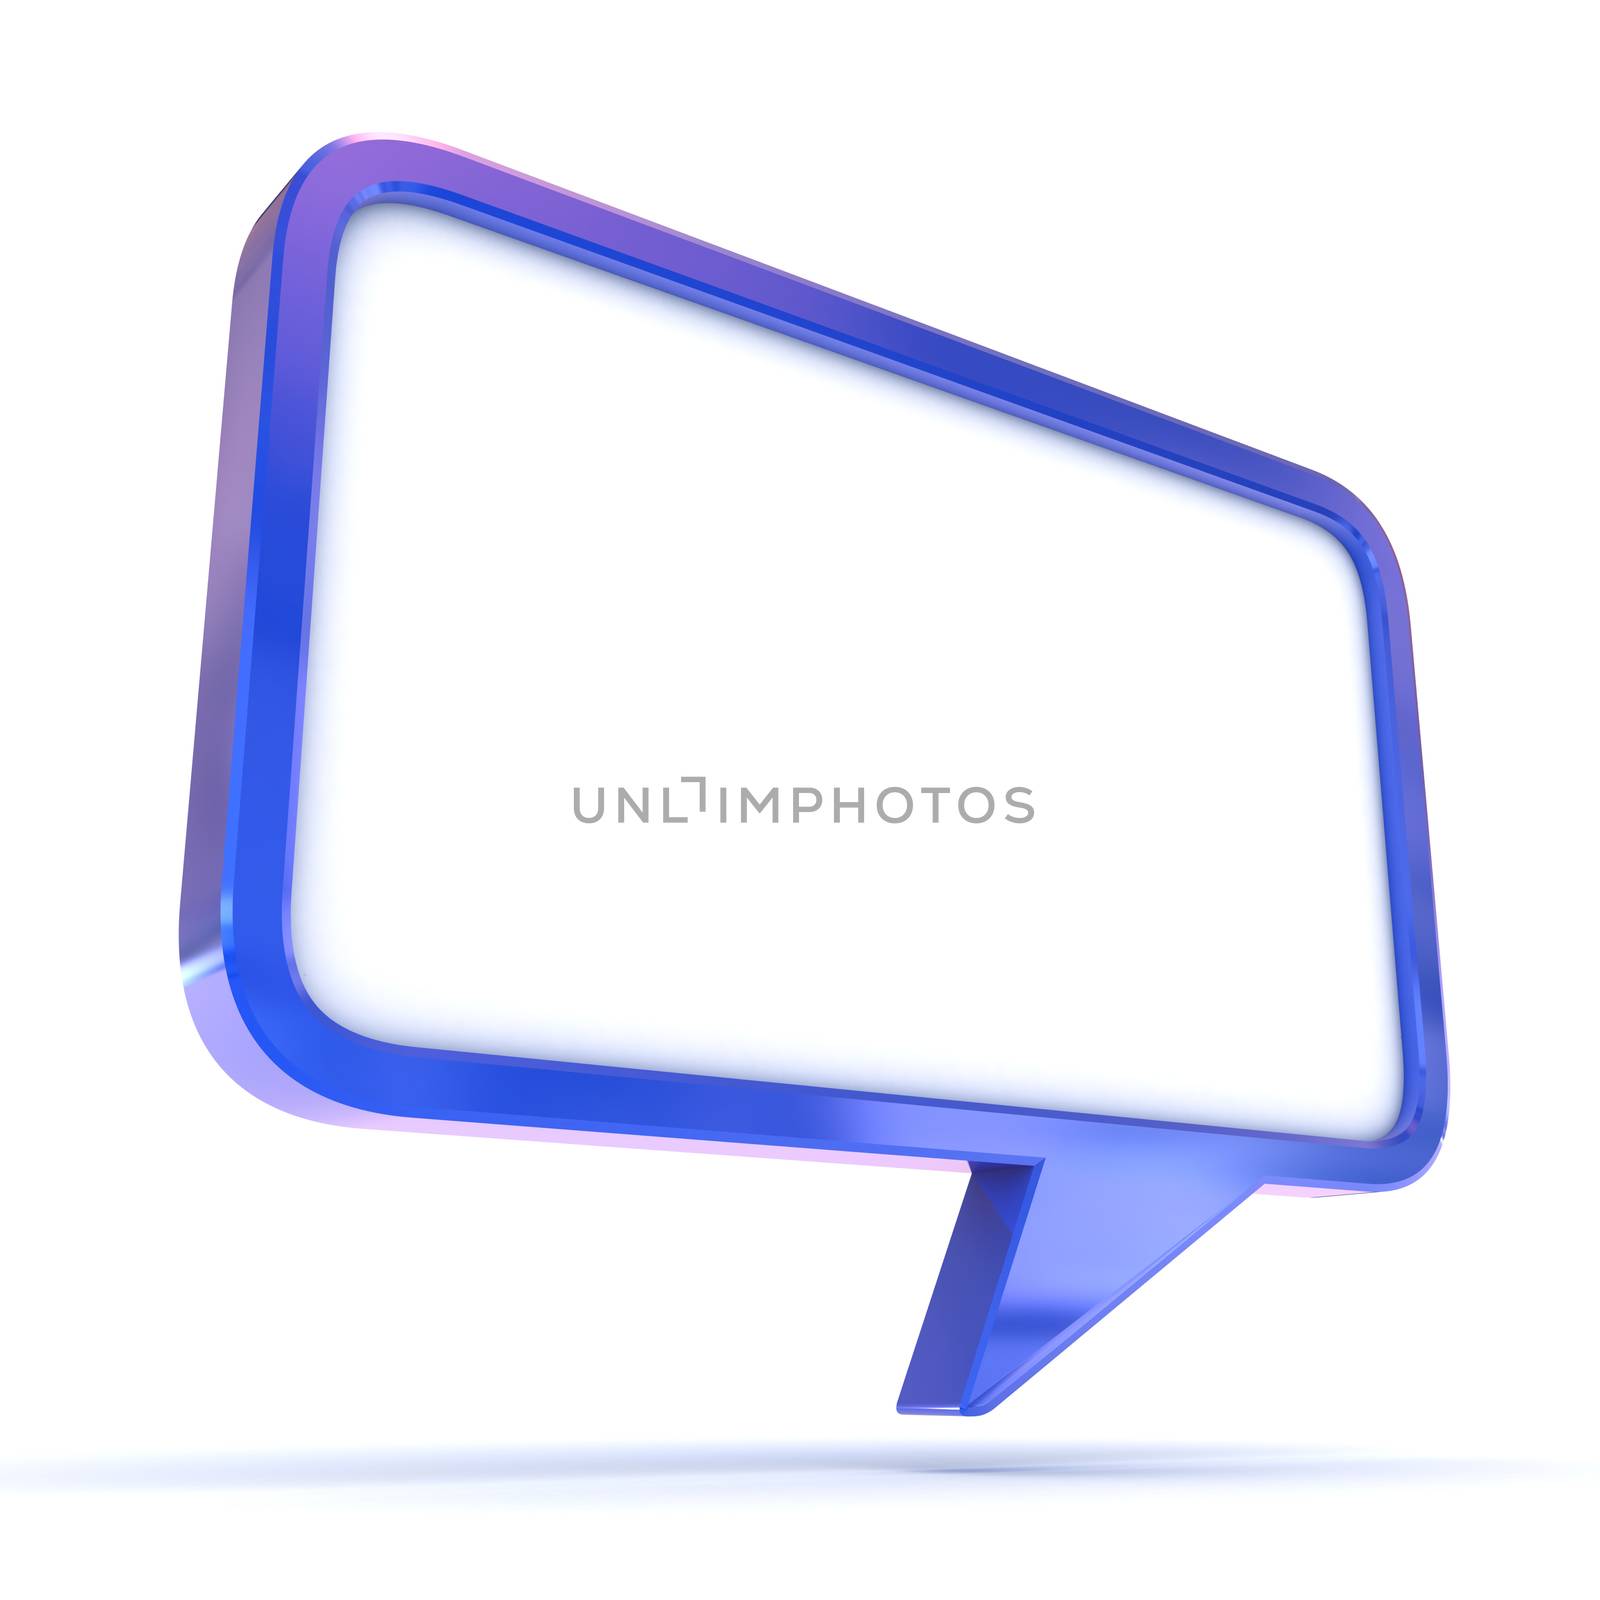 A Colourful 3d Rendered Concept Illustration showing a Speech Bubble